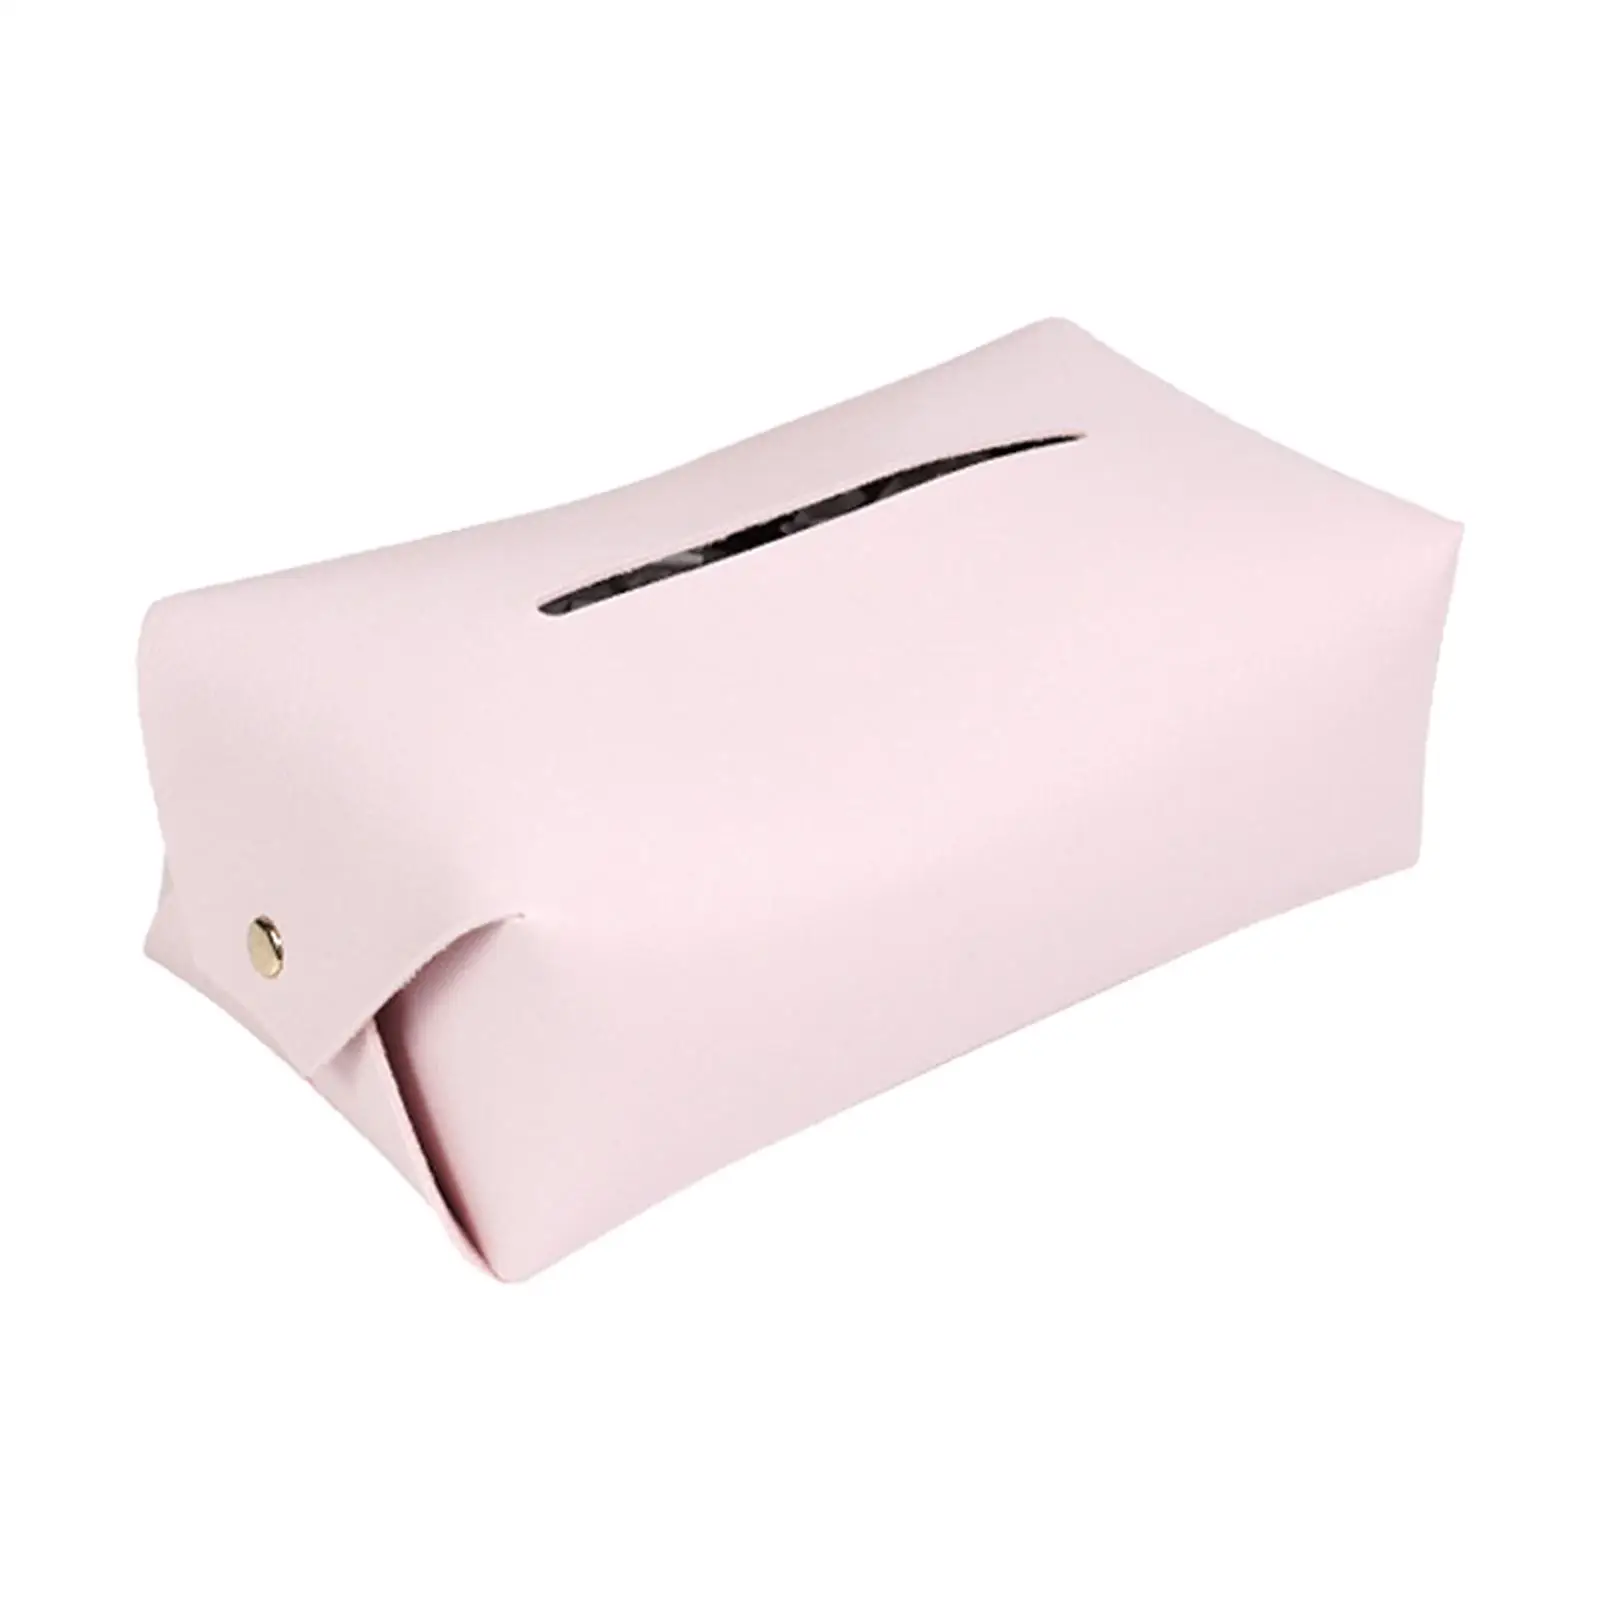 PU Leather Tissue Box Cover Case for Vanity Countertop Living Room Table